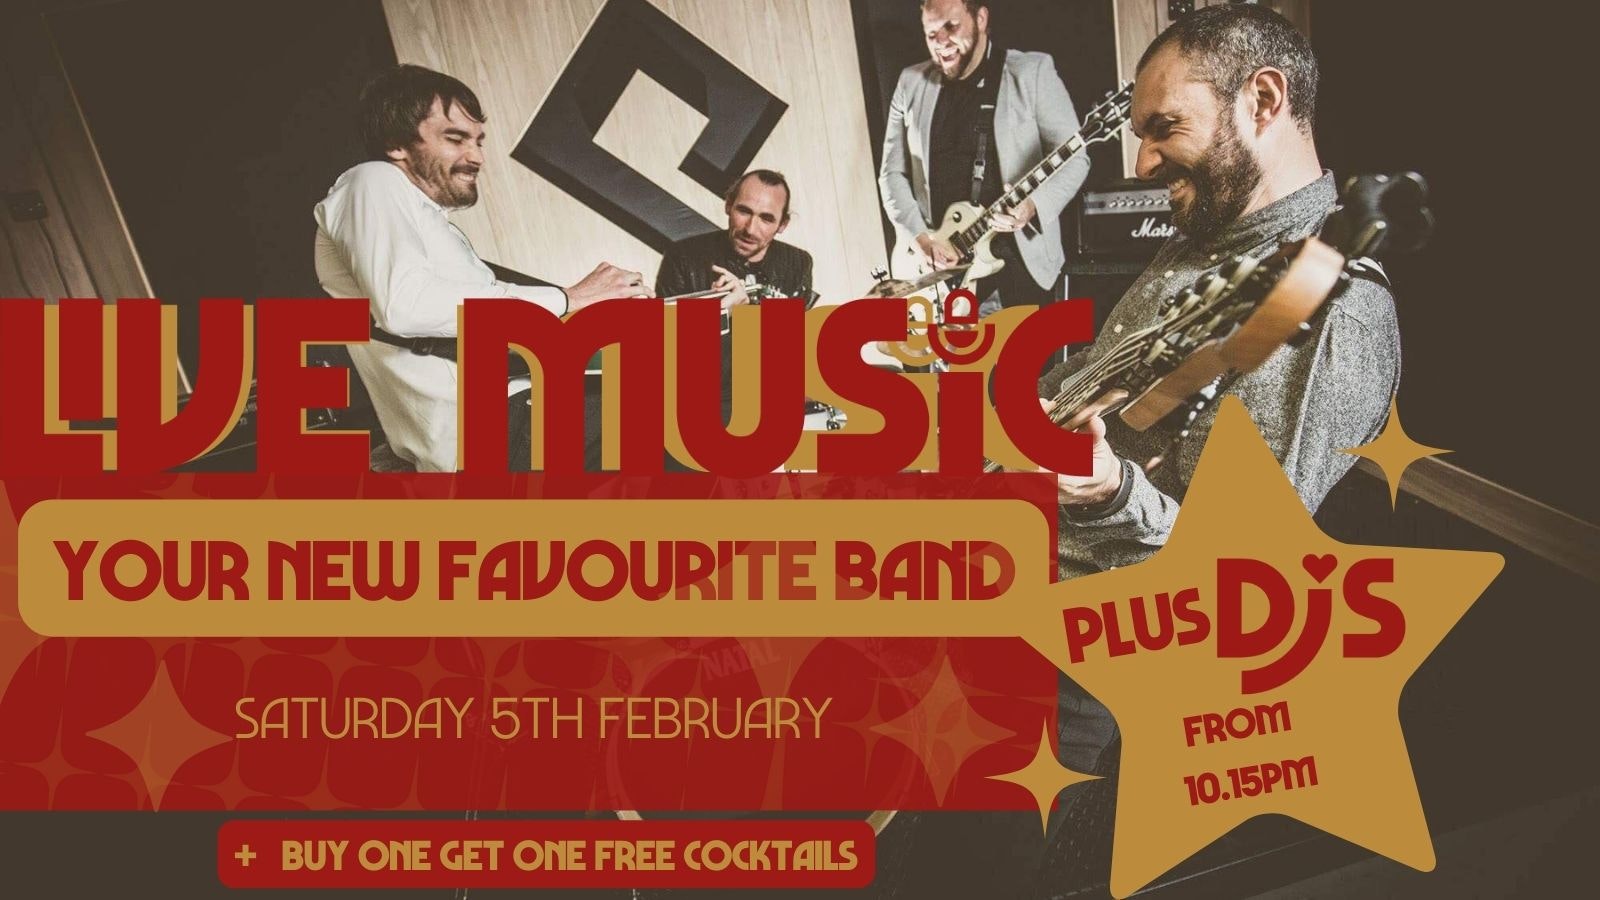 Live Music: YOUR NEW FAVOURITE BAND // Annabel’s Cabaret & Discotheque